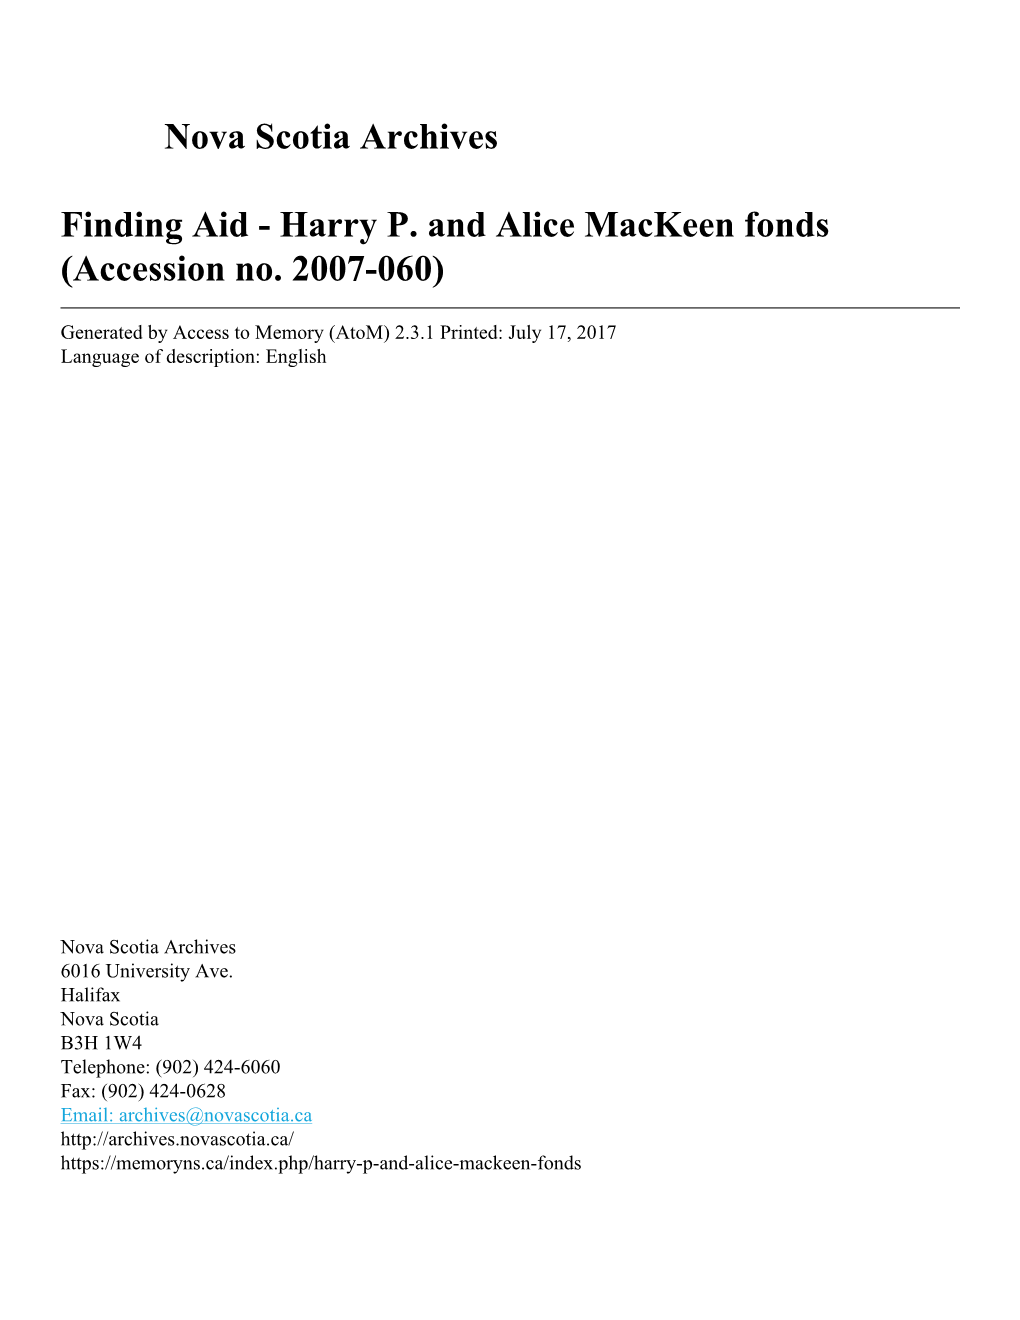 Harry P. and Alice Mackeen Fonds (Accession No